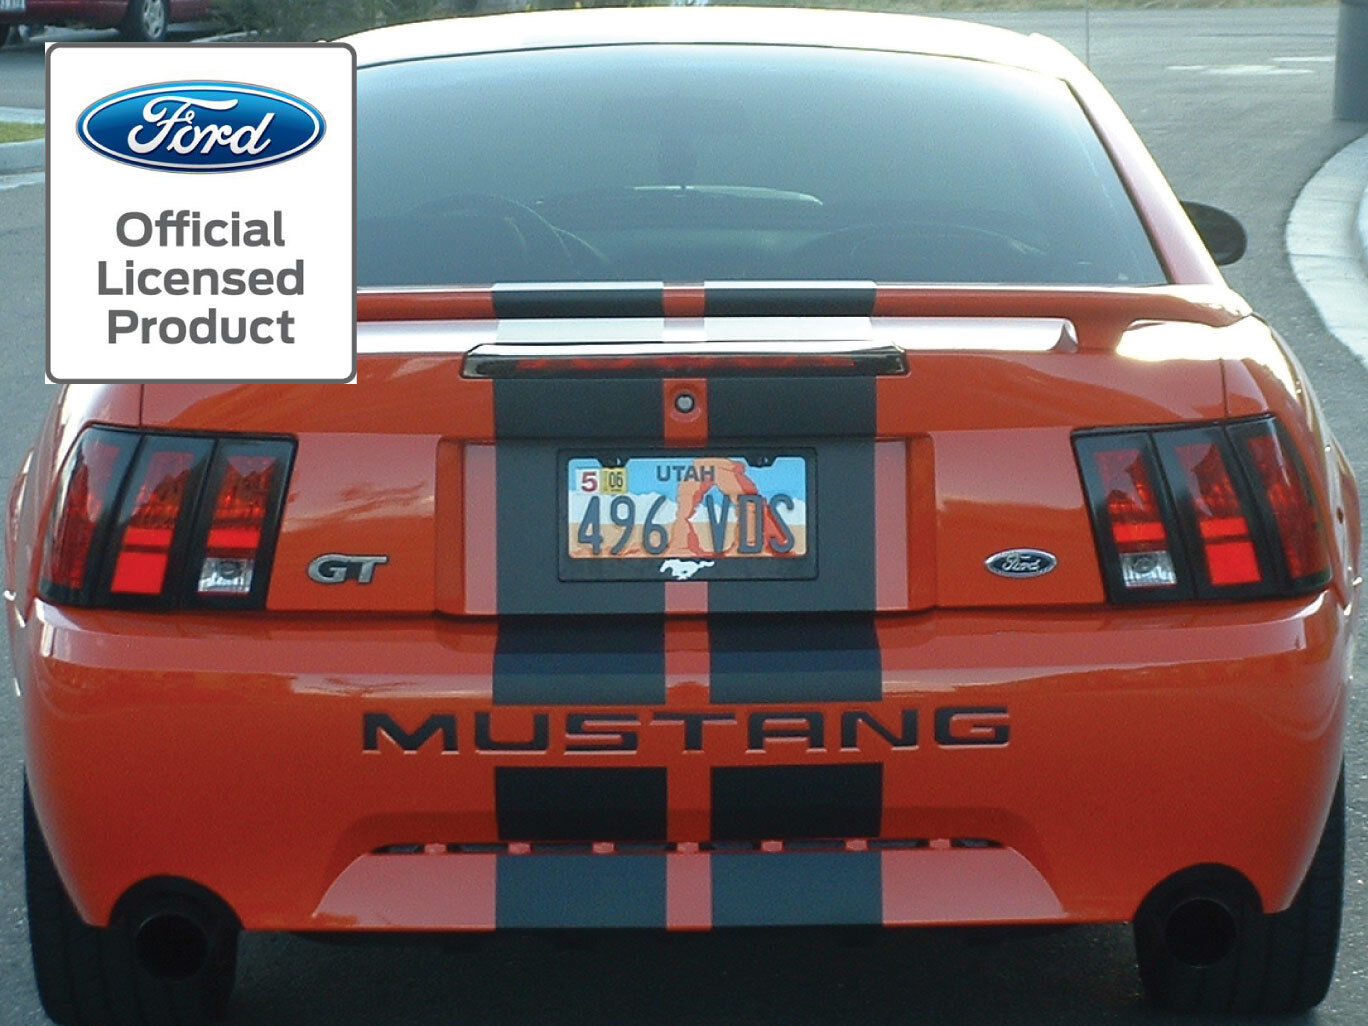 2002 2003 2004 Ford Mustang Letters Rear Bumper Inserts Vinyl Decals Fits 99-04